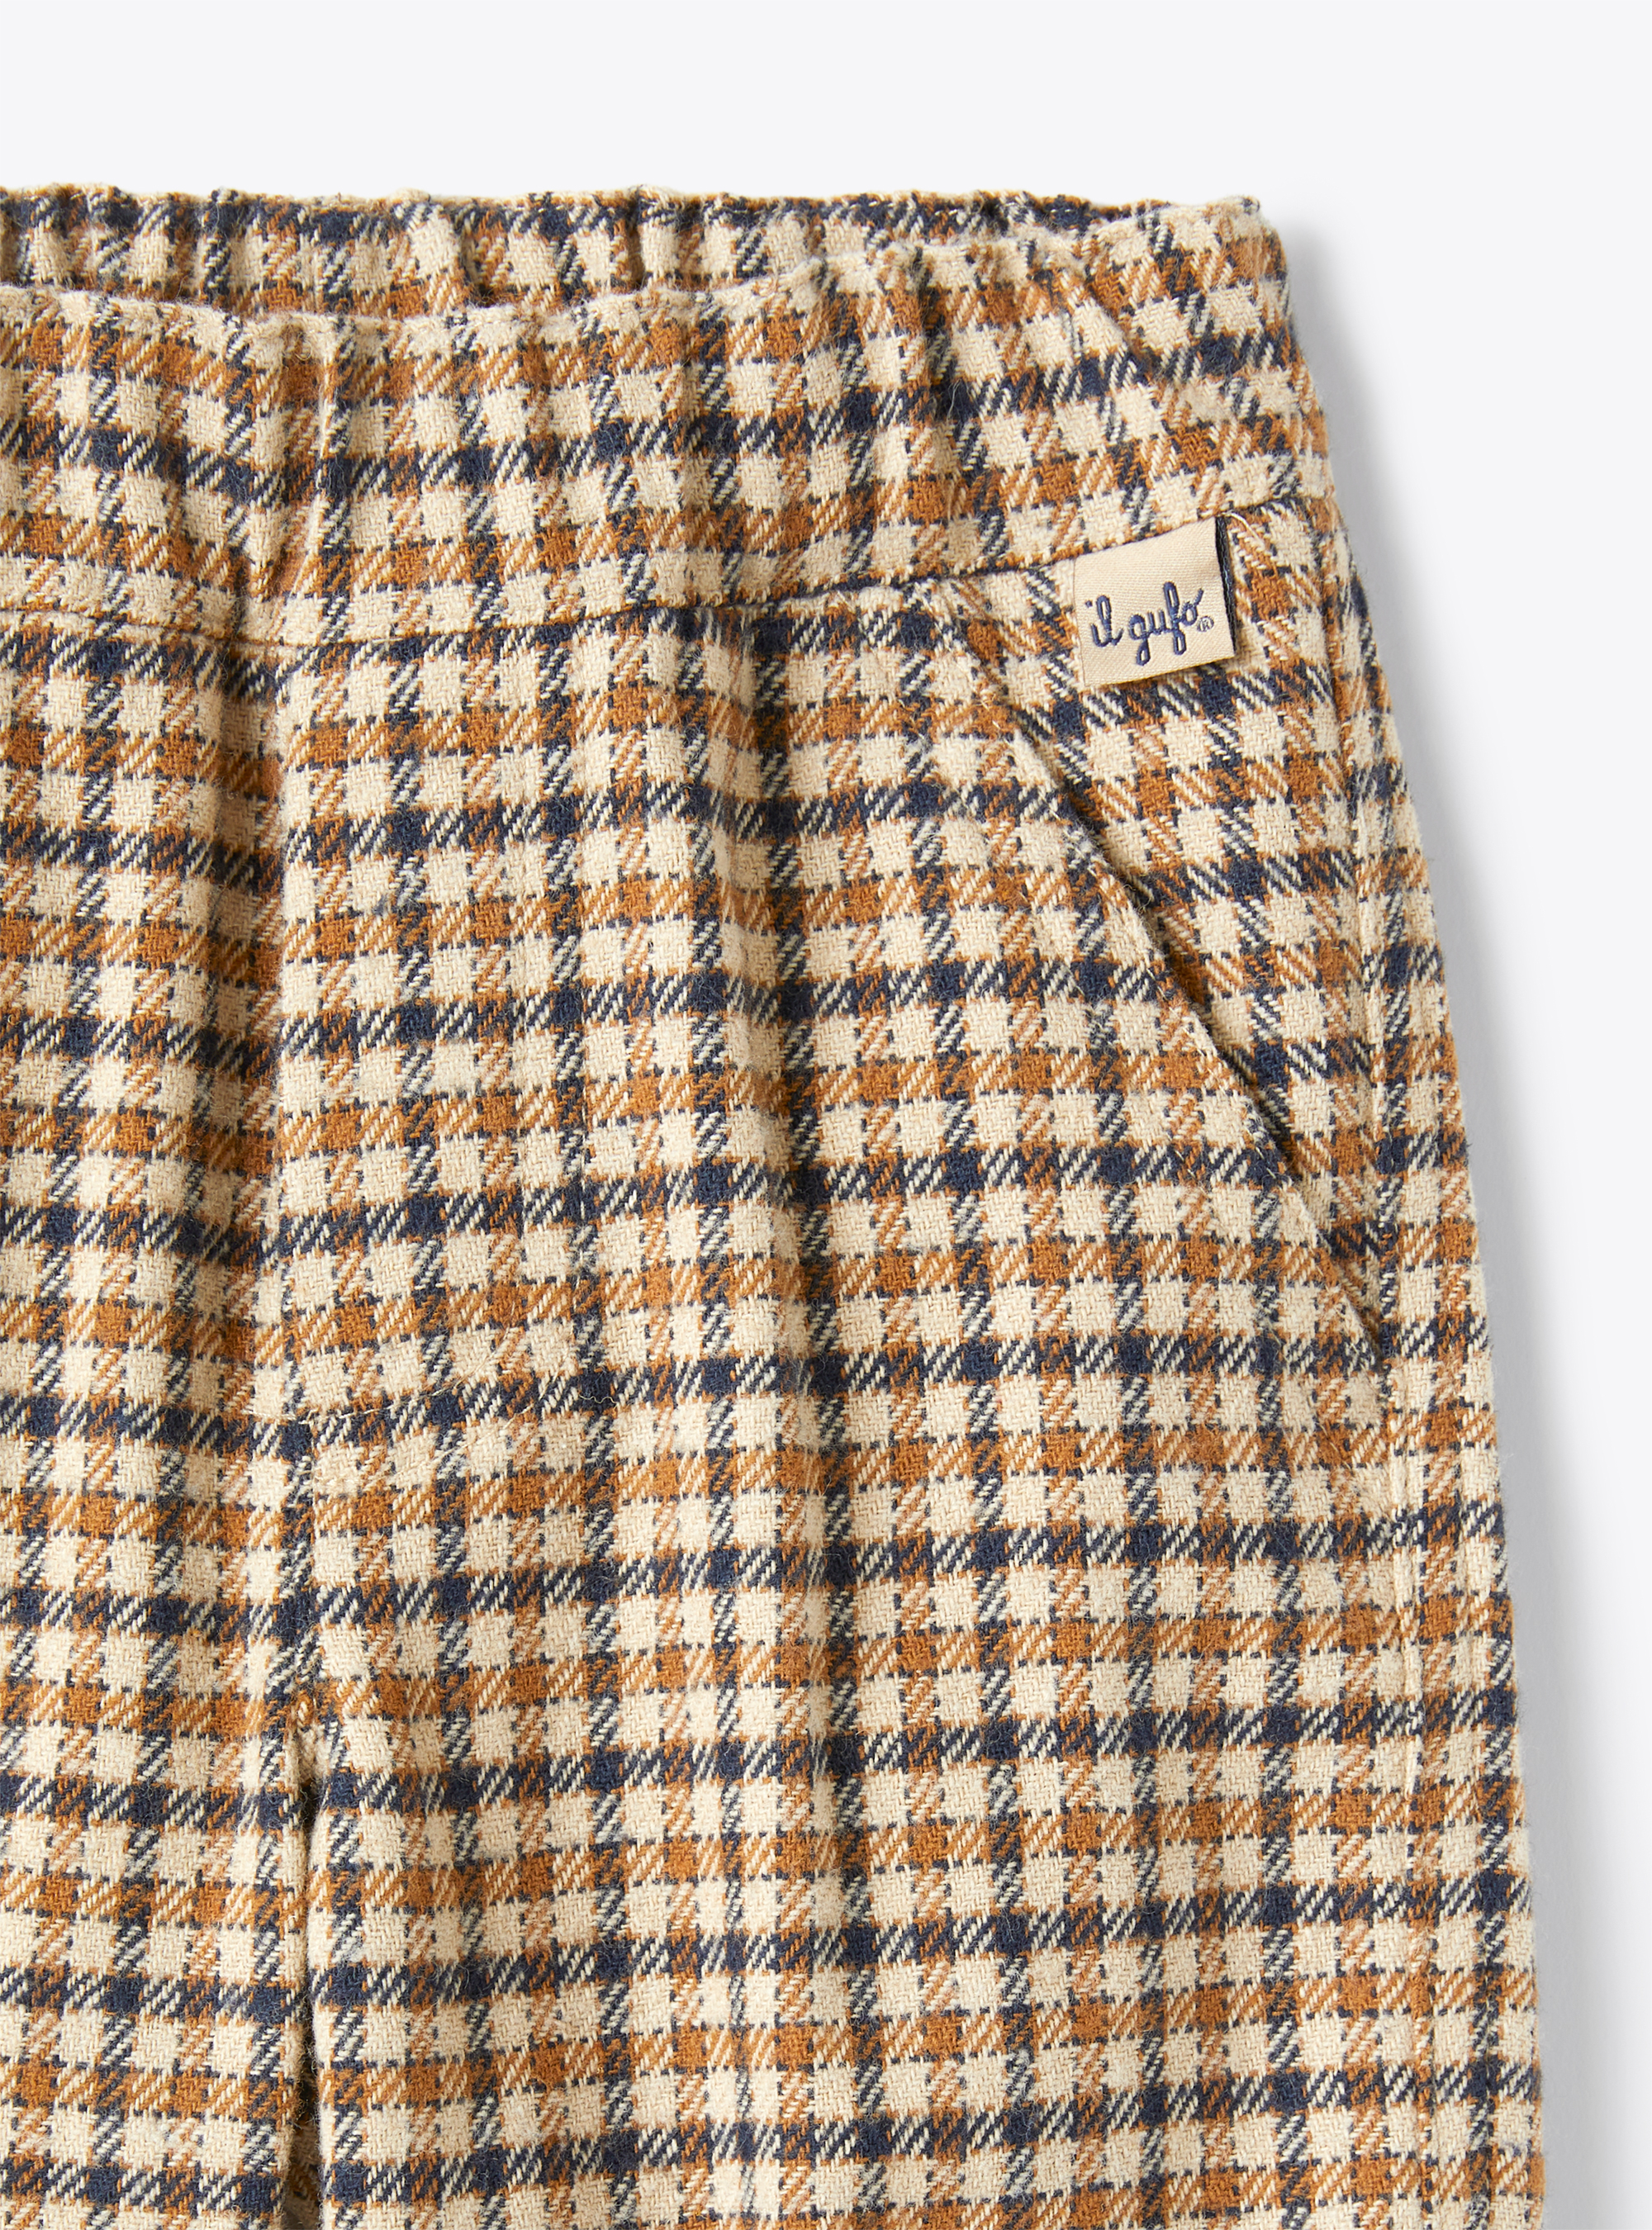 Baby boy’s trousers in a check pattern - Blue | Il Gufo